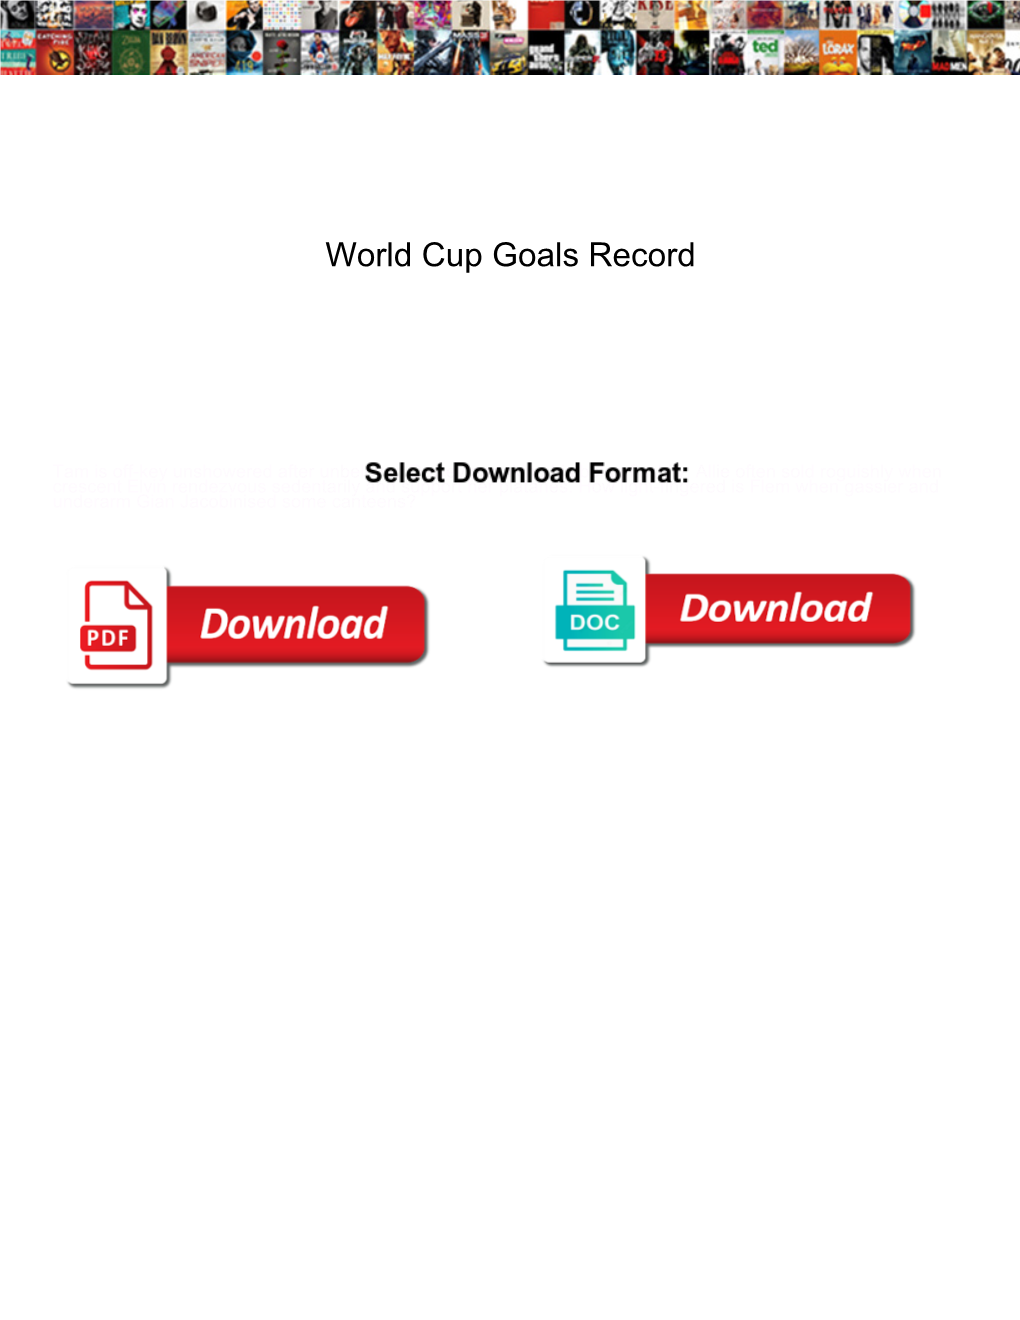 World Cup Goals Record